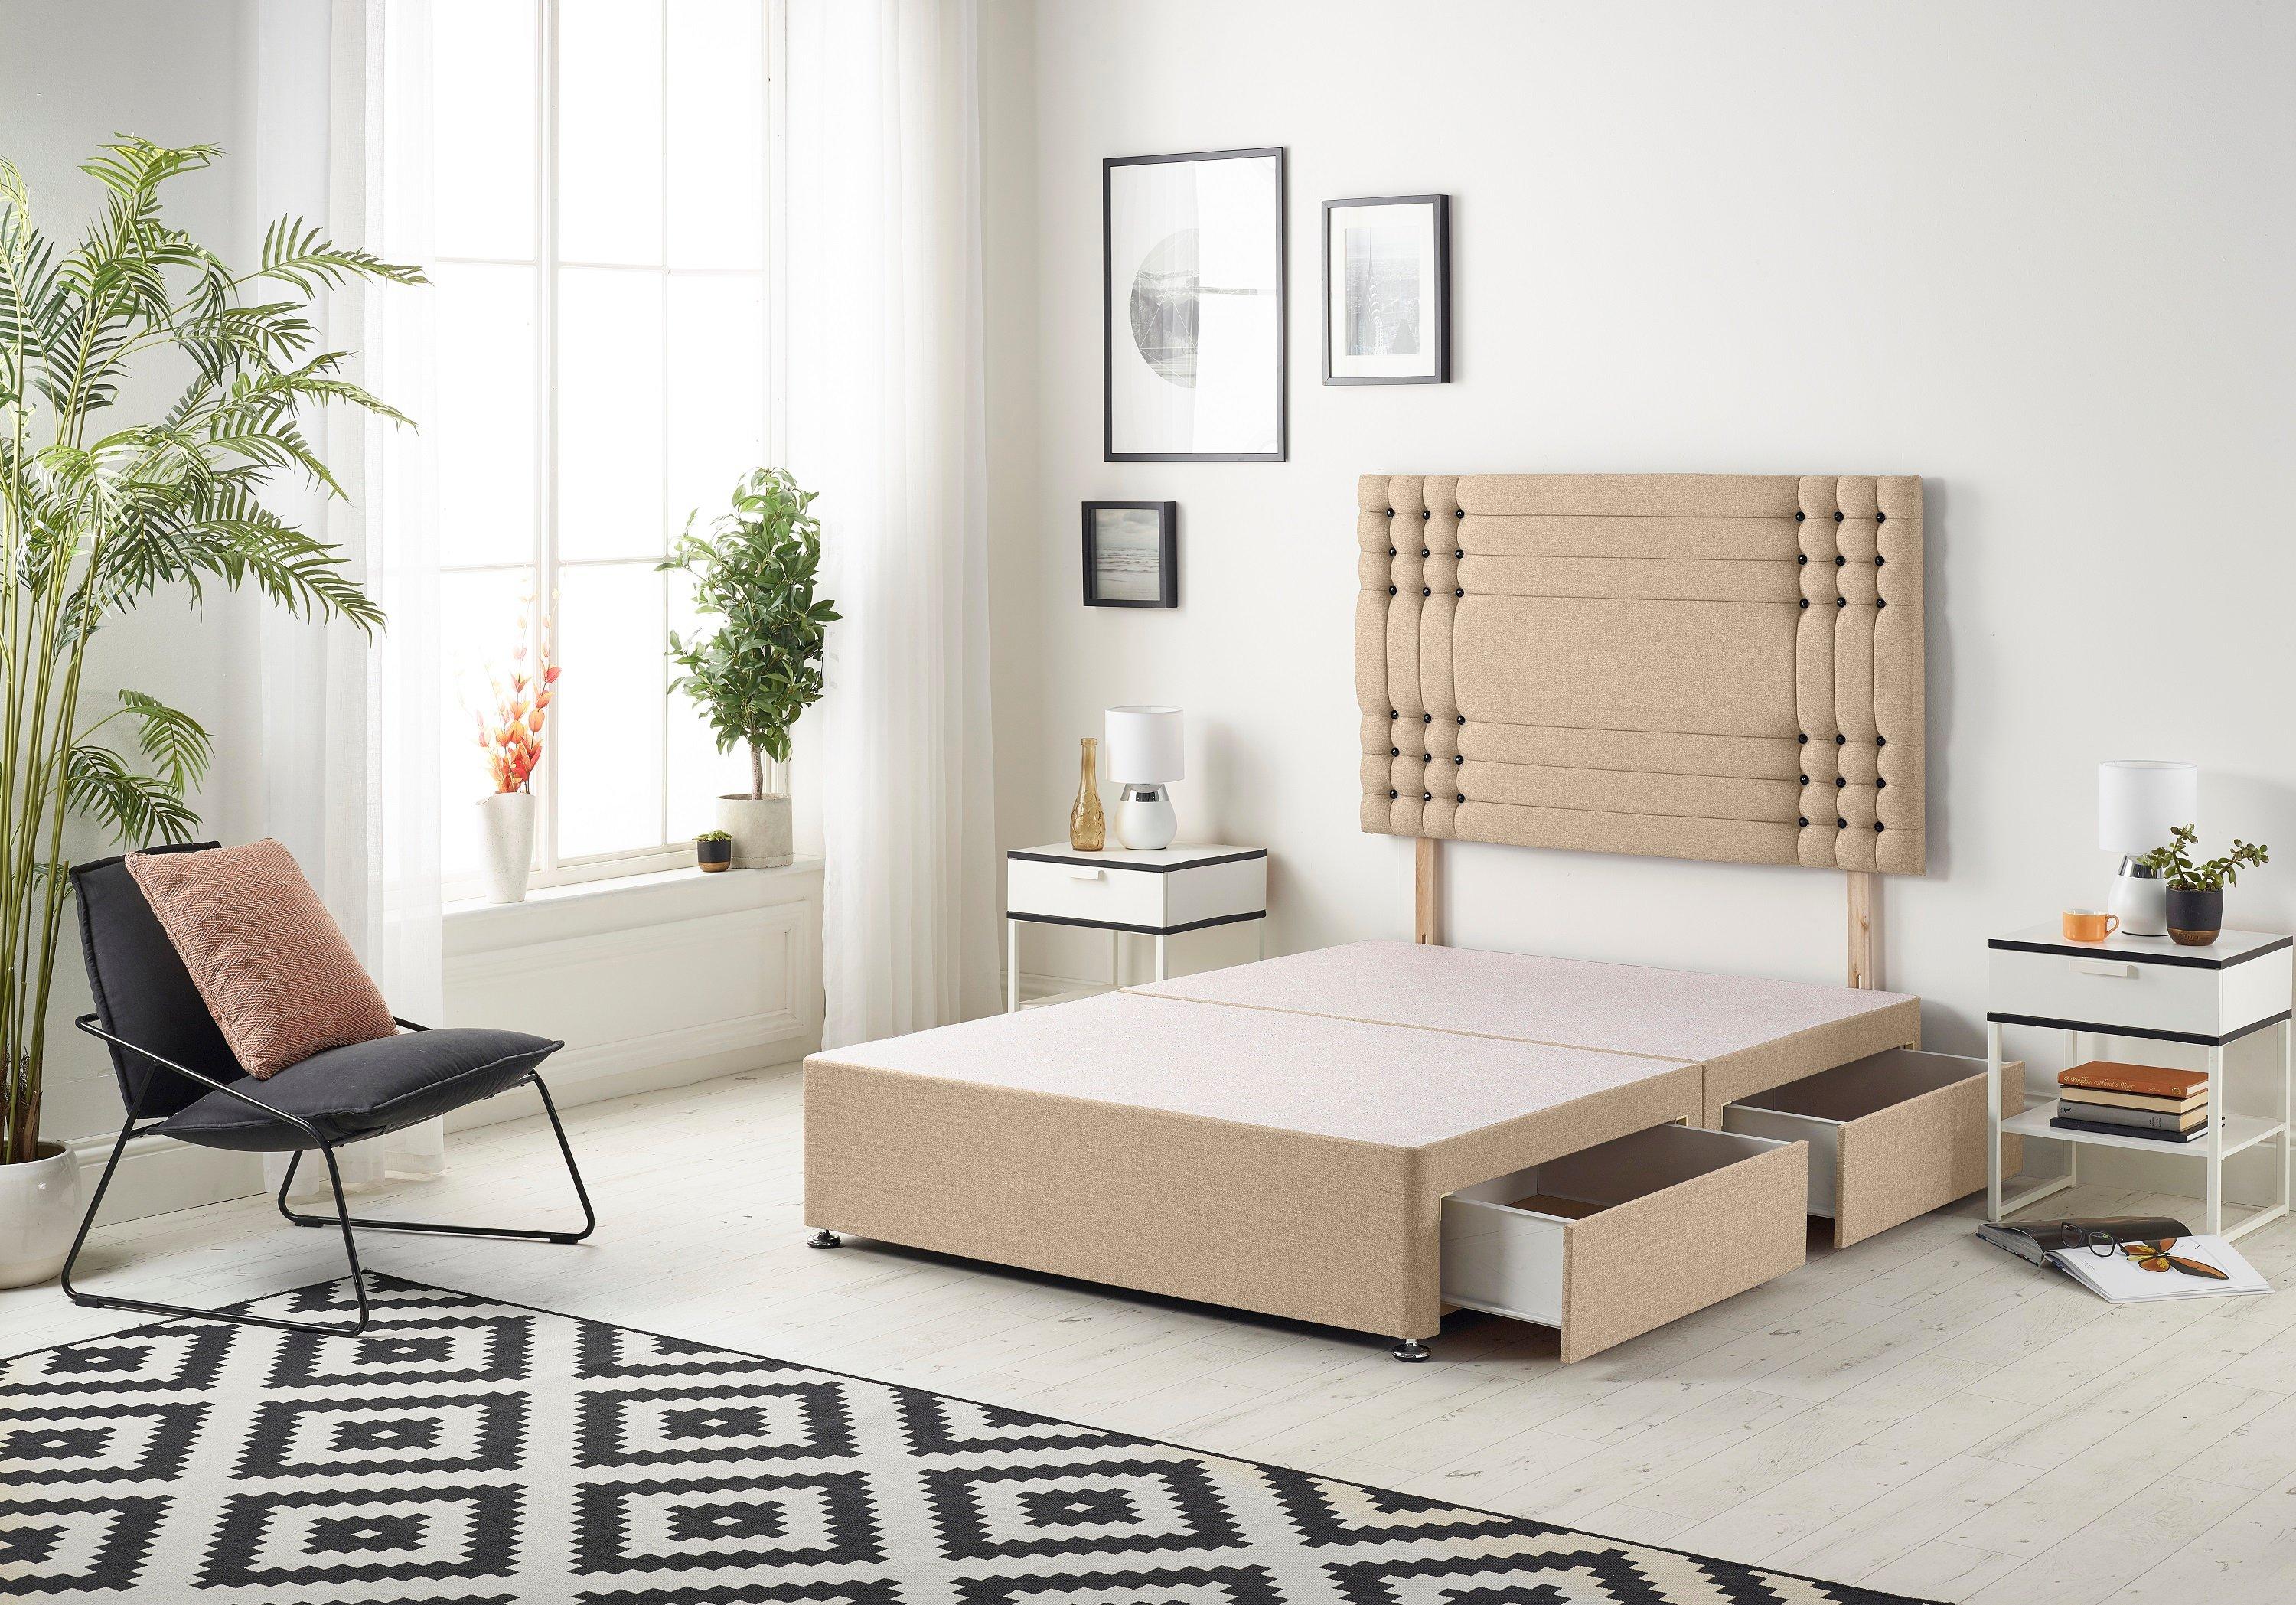 Flexby Divan Bed Base With 4 Drawers and Headboard Plush